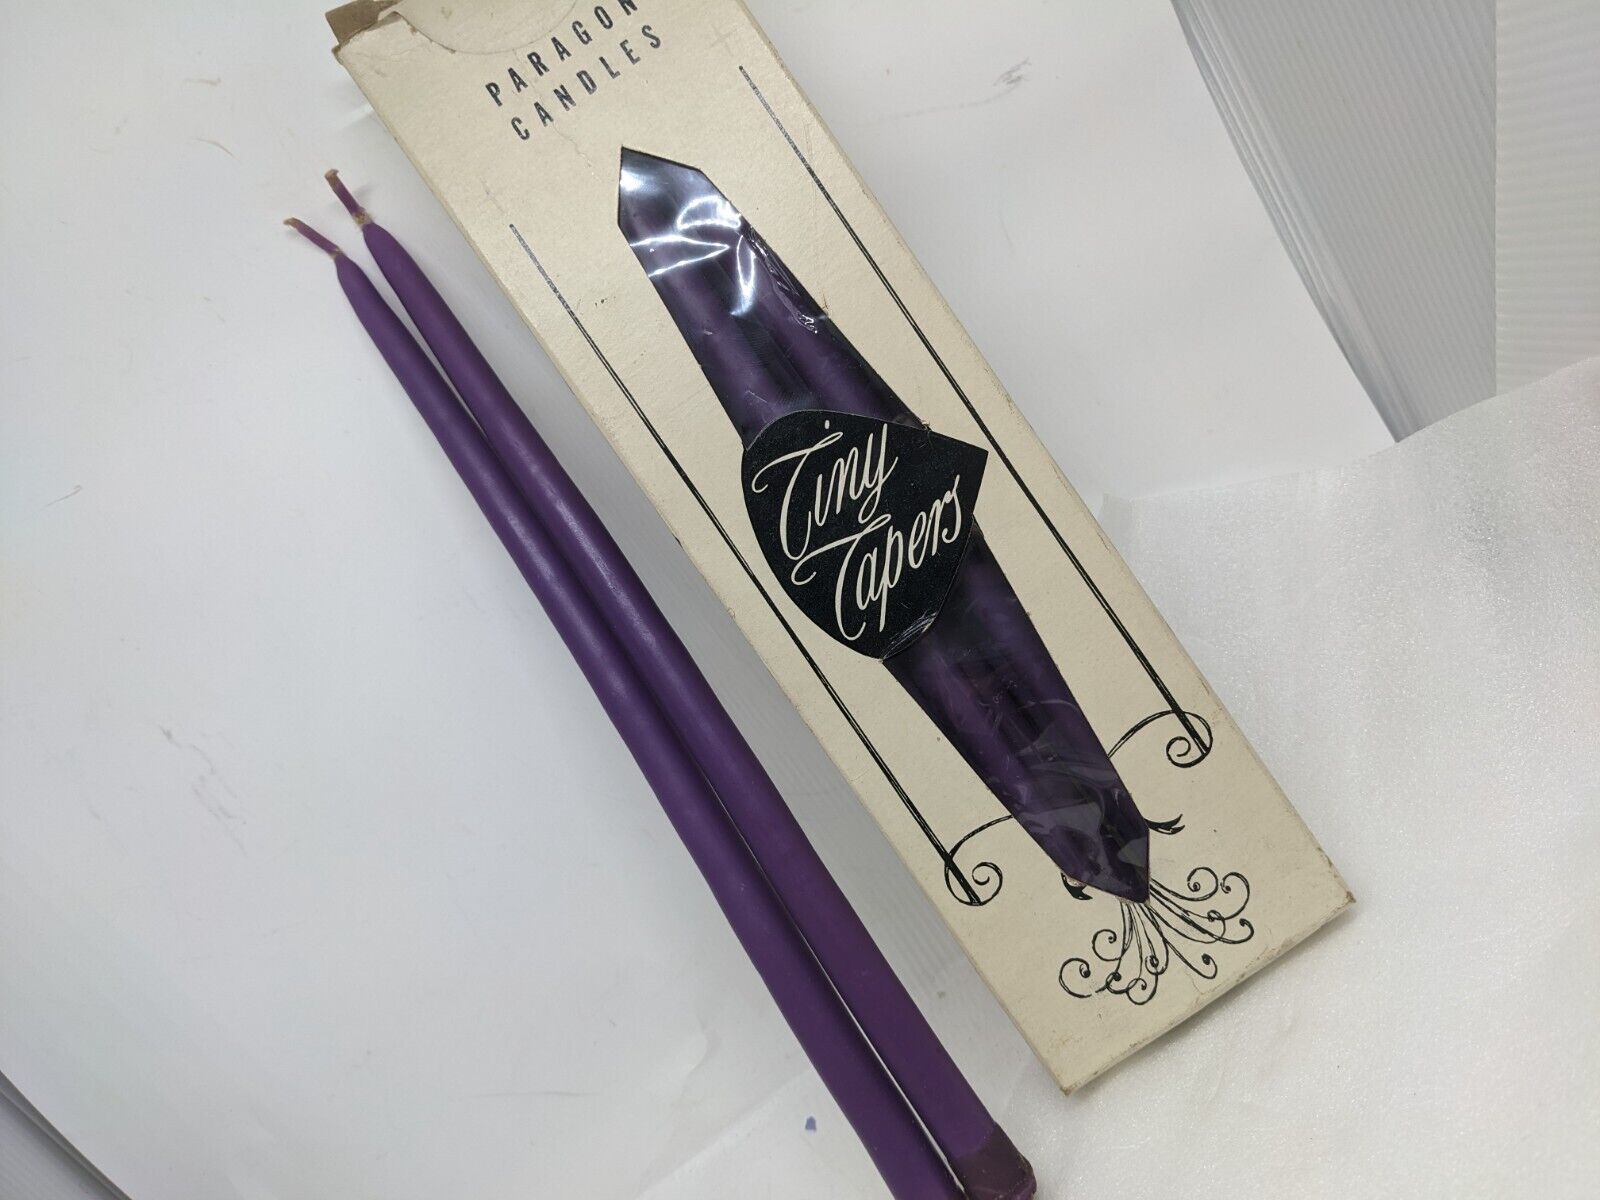 Purple candle 12  Taper Dinner Candles 10-inch Tall Paragon Candles Vintage - $15.84